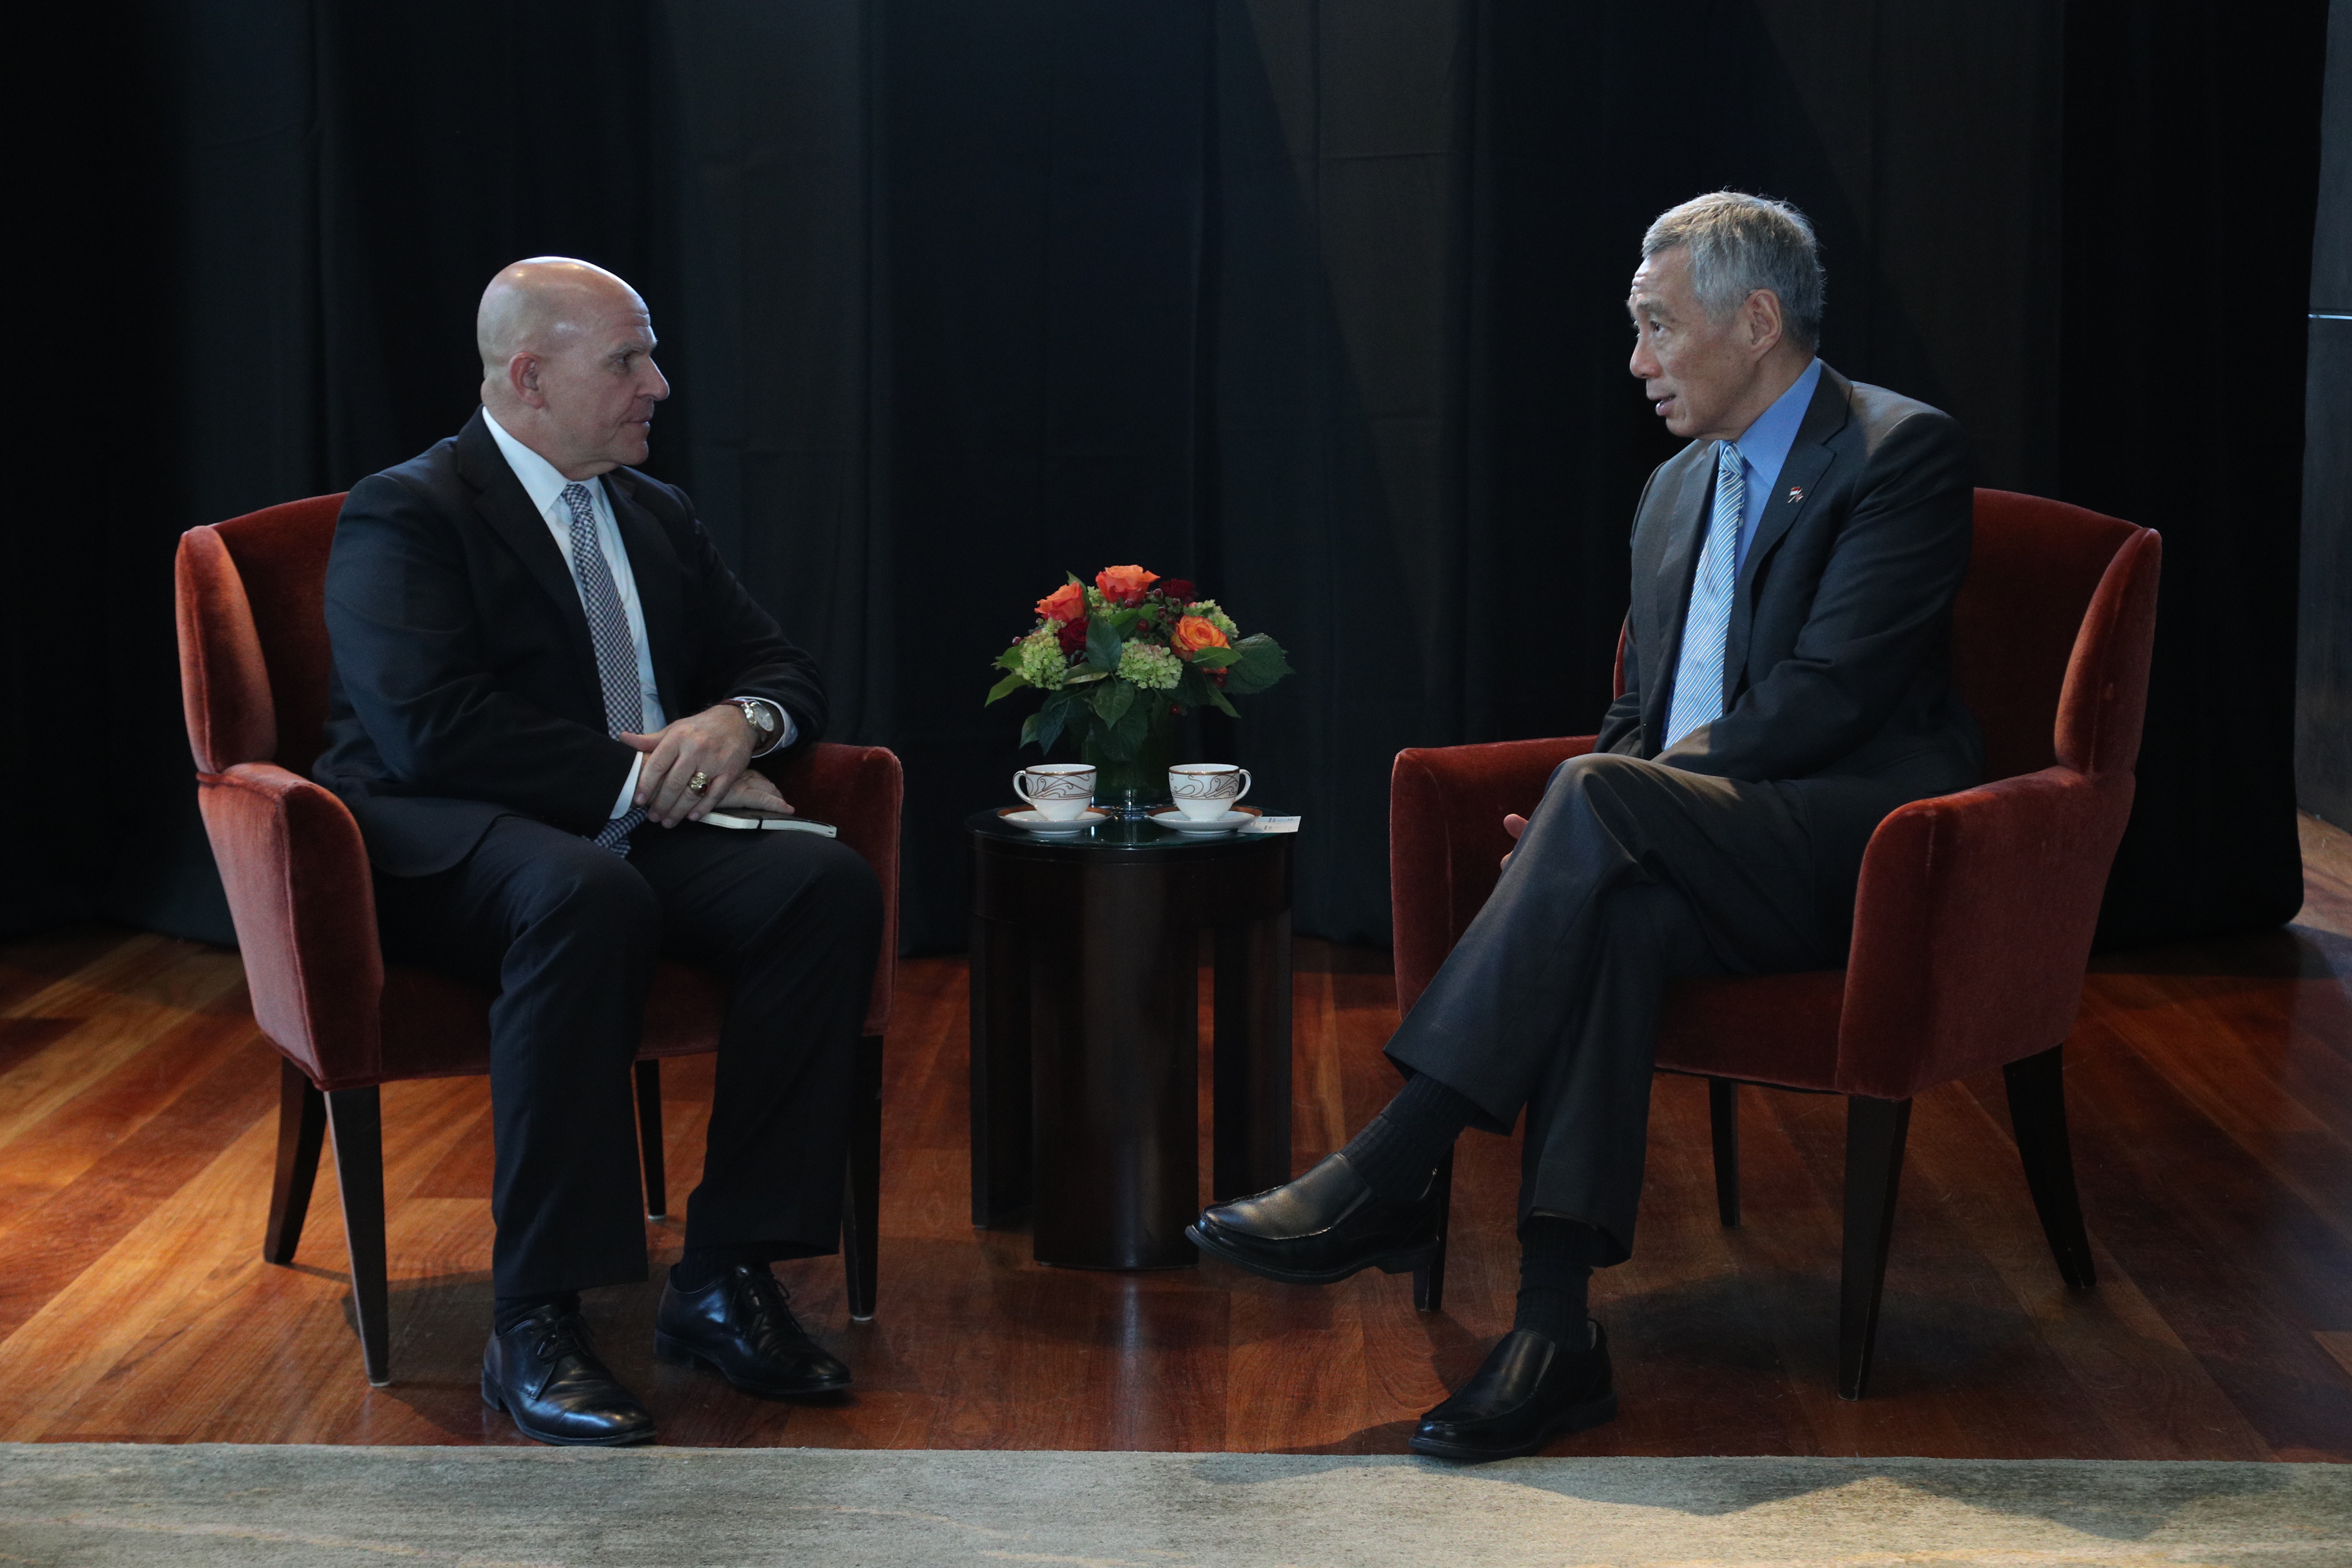 PM Lee Hsien Loong meeting with National Security Advisor H R McMaster on 24 Oct 2017 (MCI Photo by Kenji Soon)